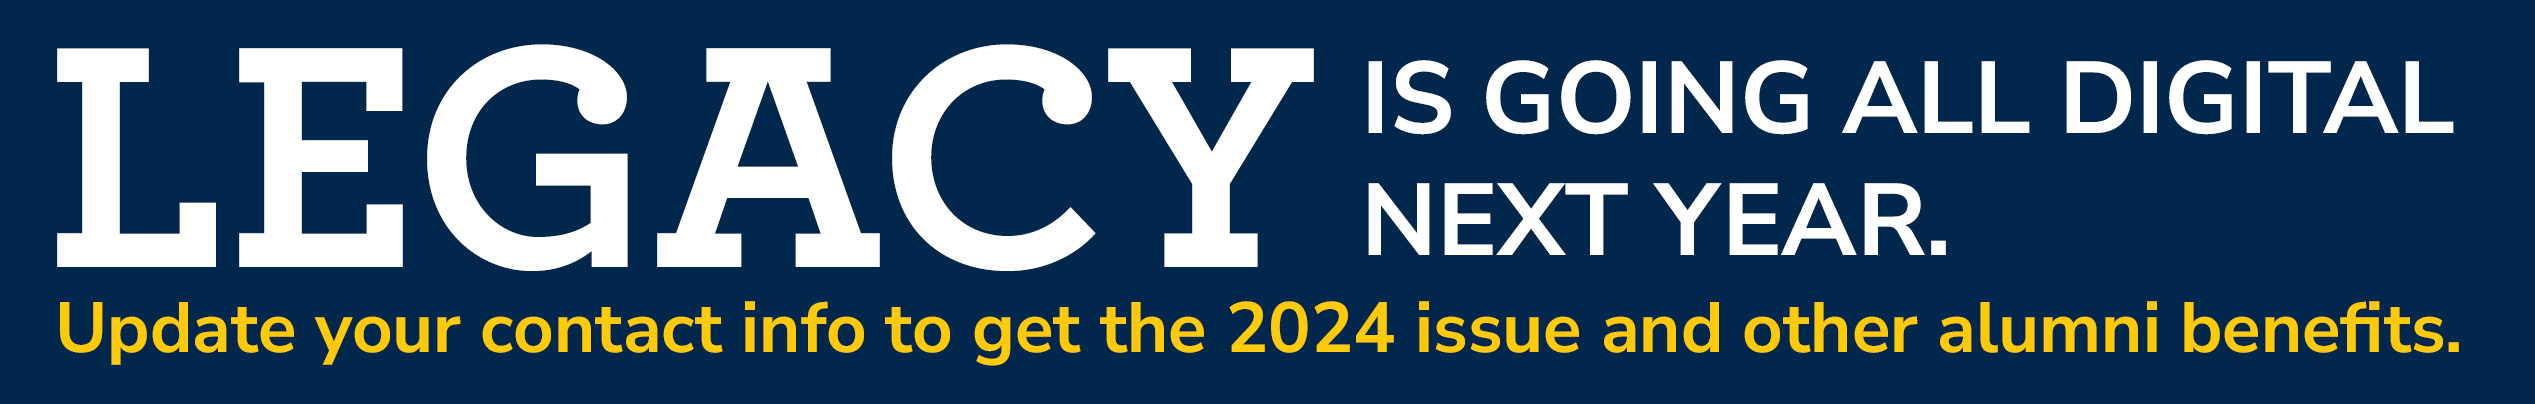 Legacy is going all digital next year. Update your contact info to receive the 2024 issue and other alumni benefits. 